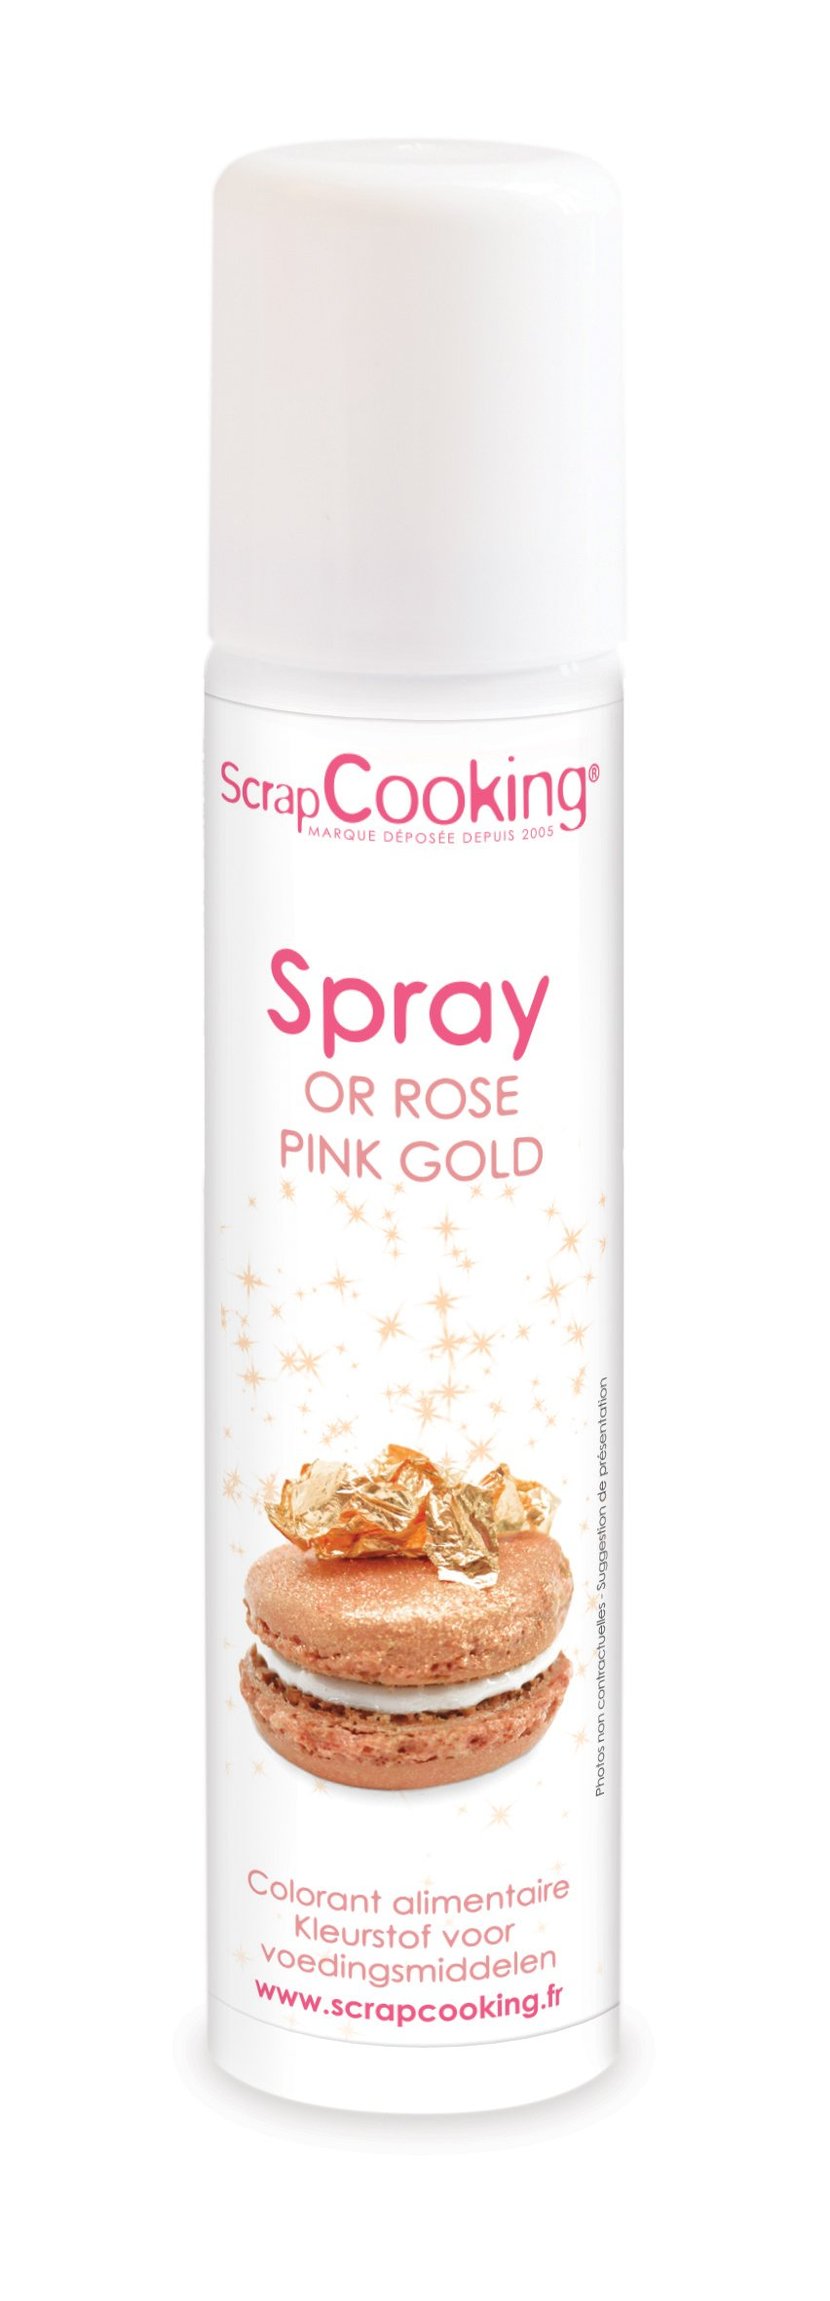 Spray colorant alimentaire - Or rose - 75ml - Colorants alimentaires  Liquides Hydrosolubles - Colorants alimentaires